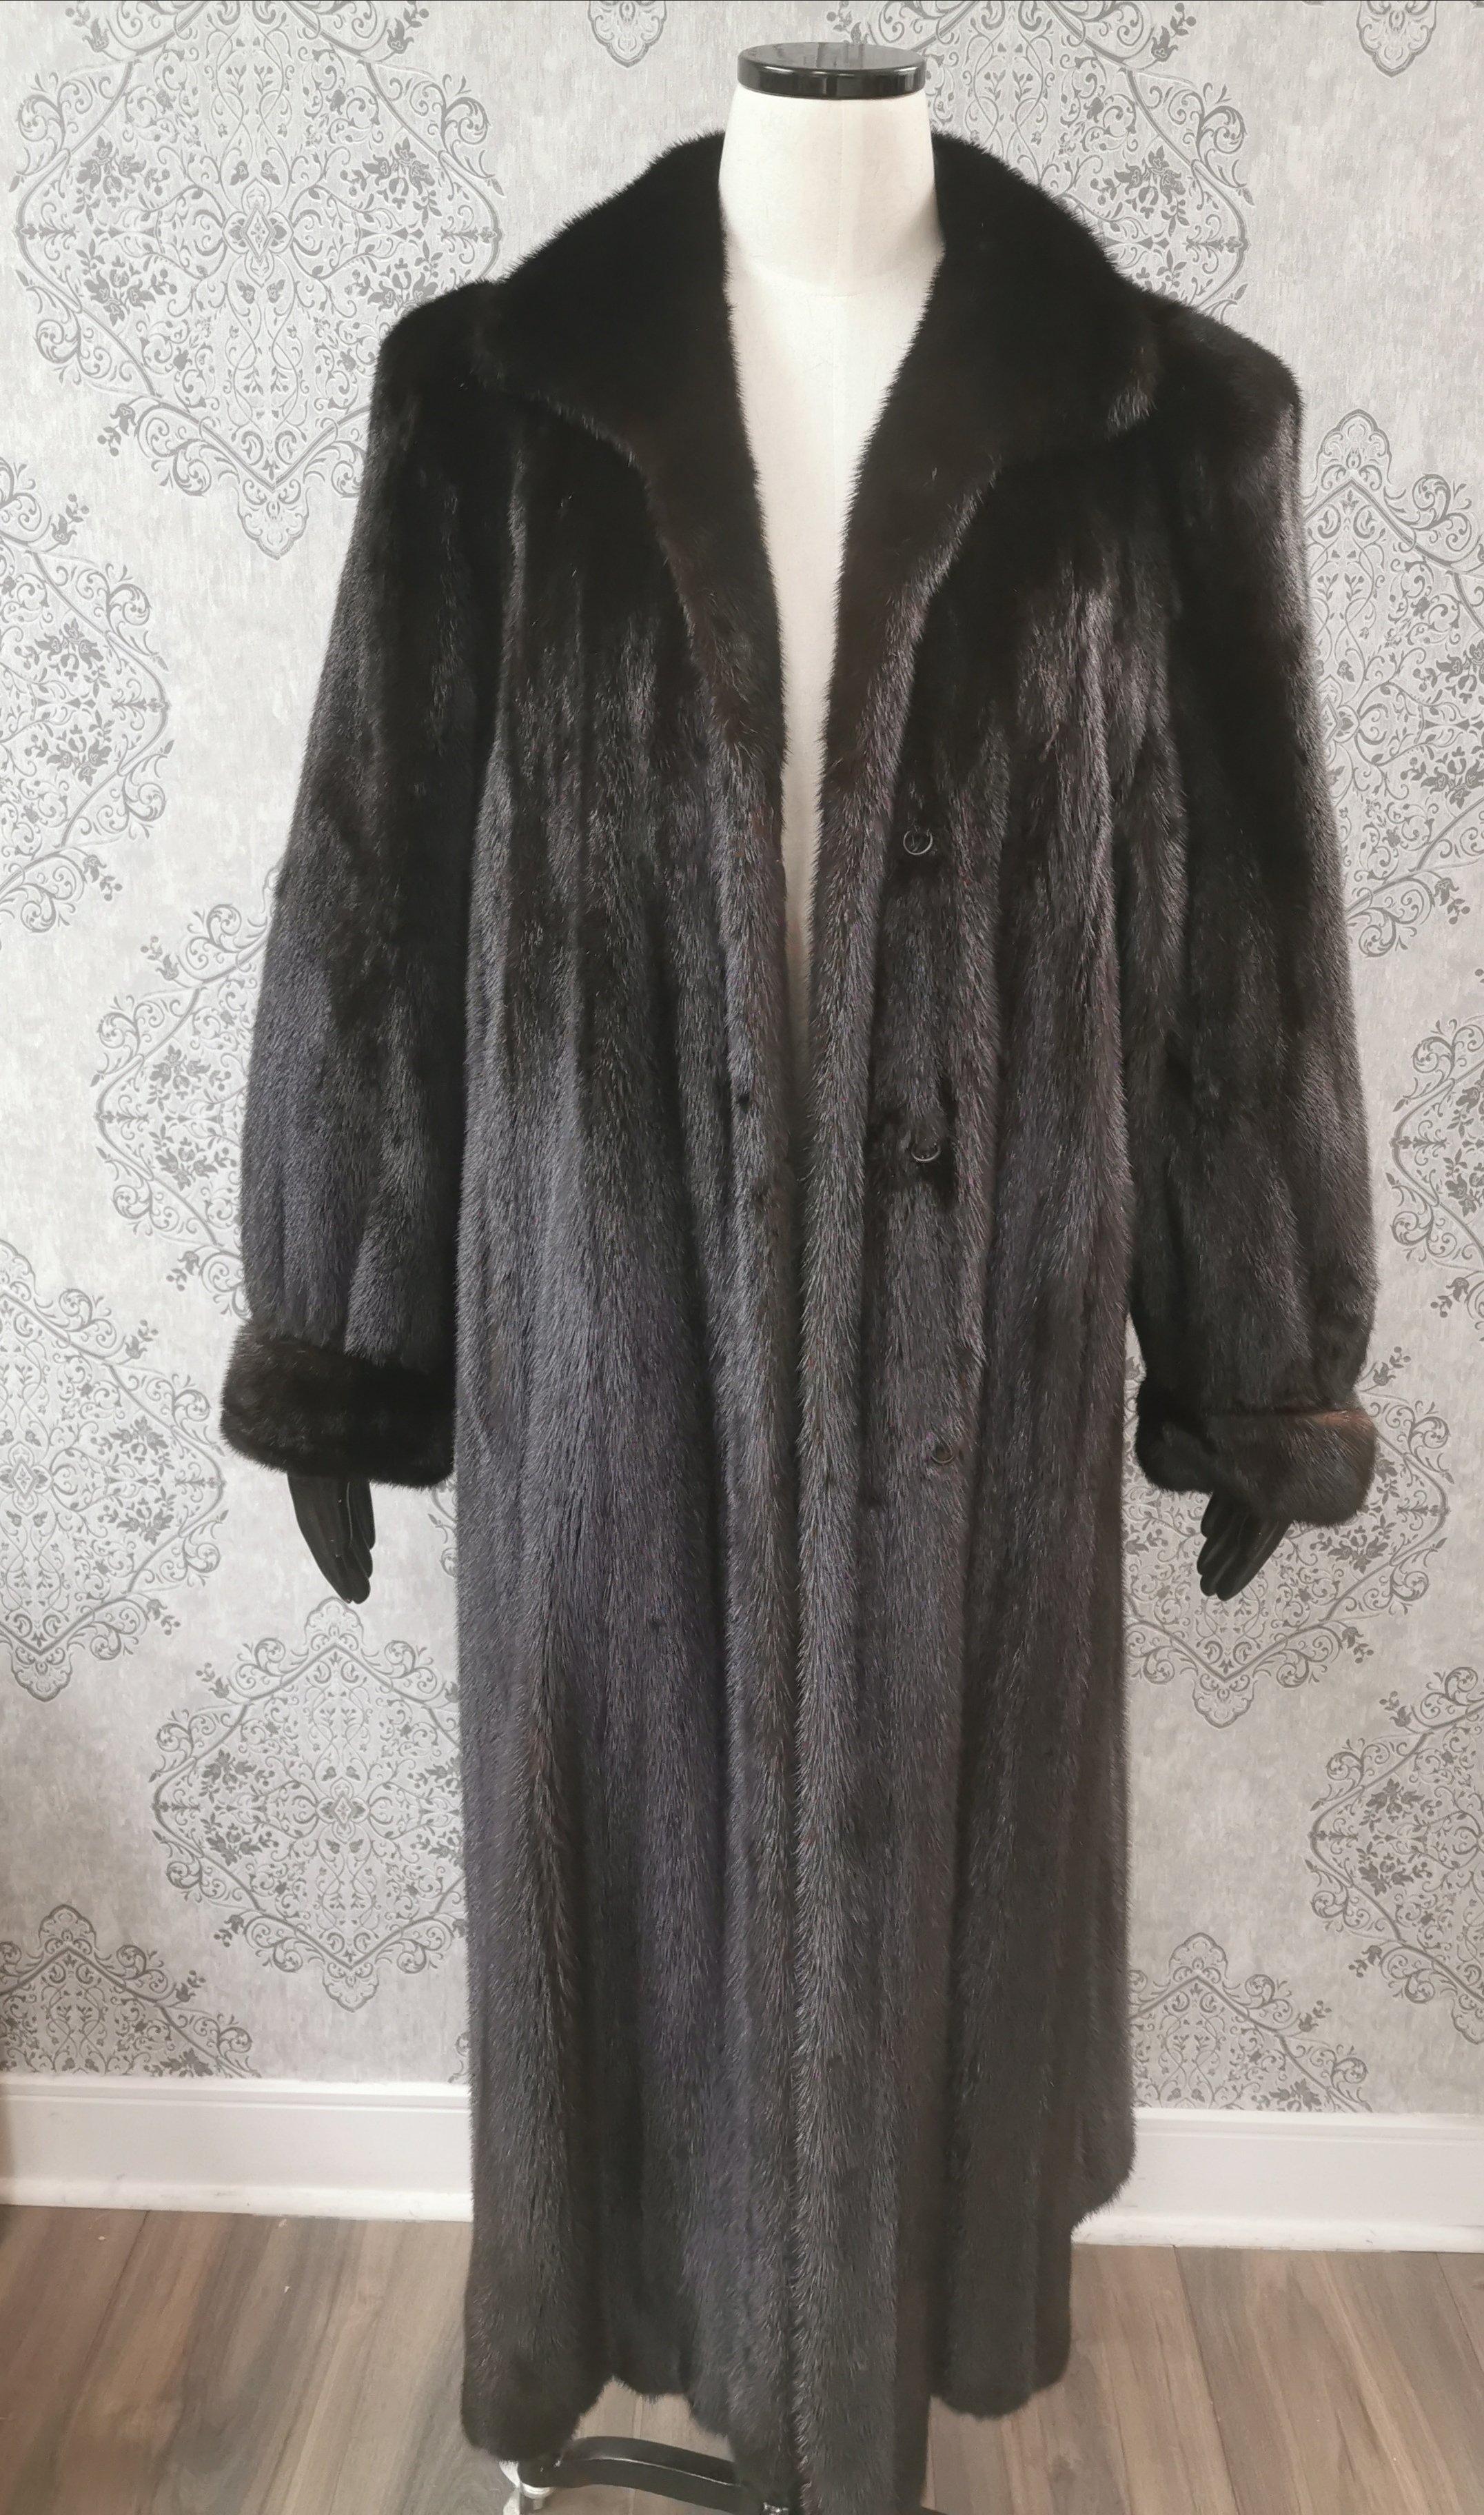 DESCRIPTION : UNUSED BLACK CHRISTIAN DIOR MINK FUR COAT SIZE 14

Portrait collar, supple skins,beautiful fresh fur, european german clasps for closure, too slit pockets, nice big full pelts skins in excellent condition.

This item is made in Canada